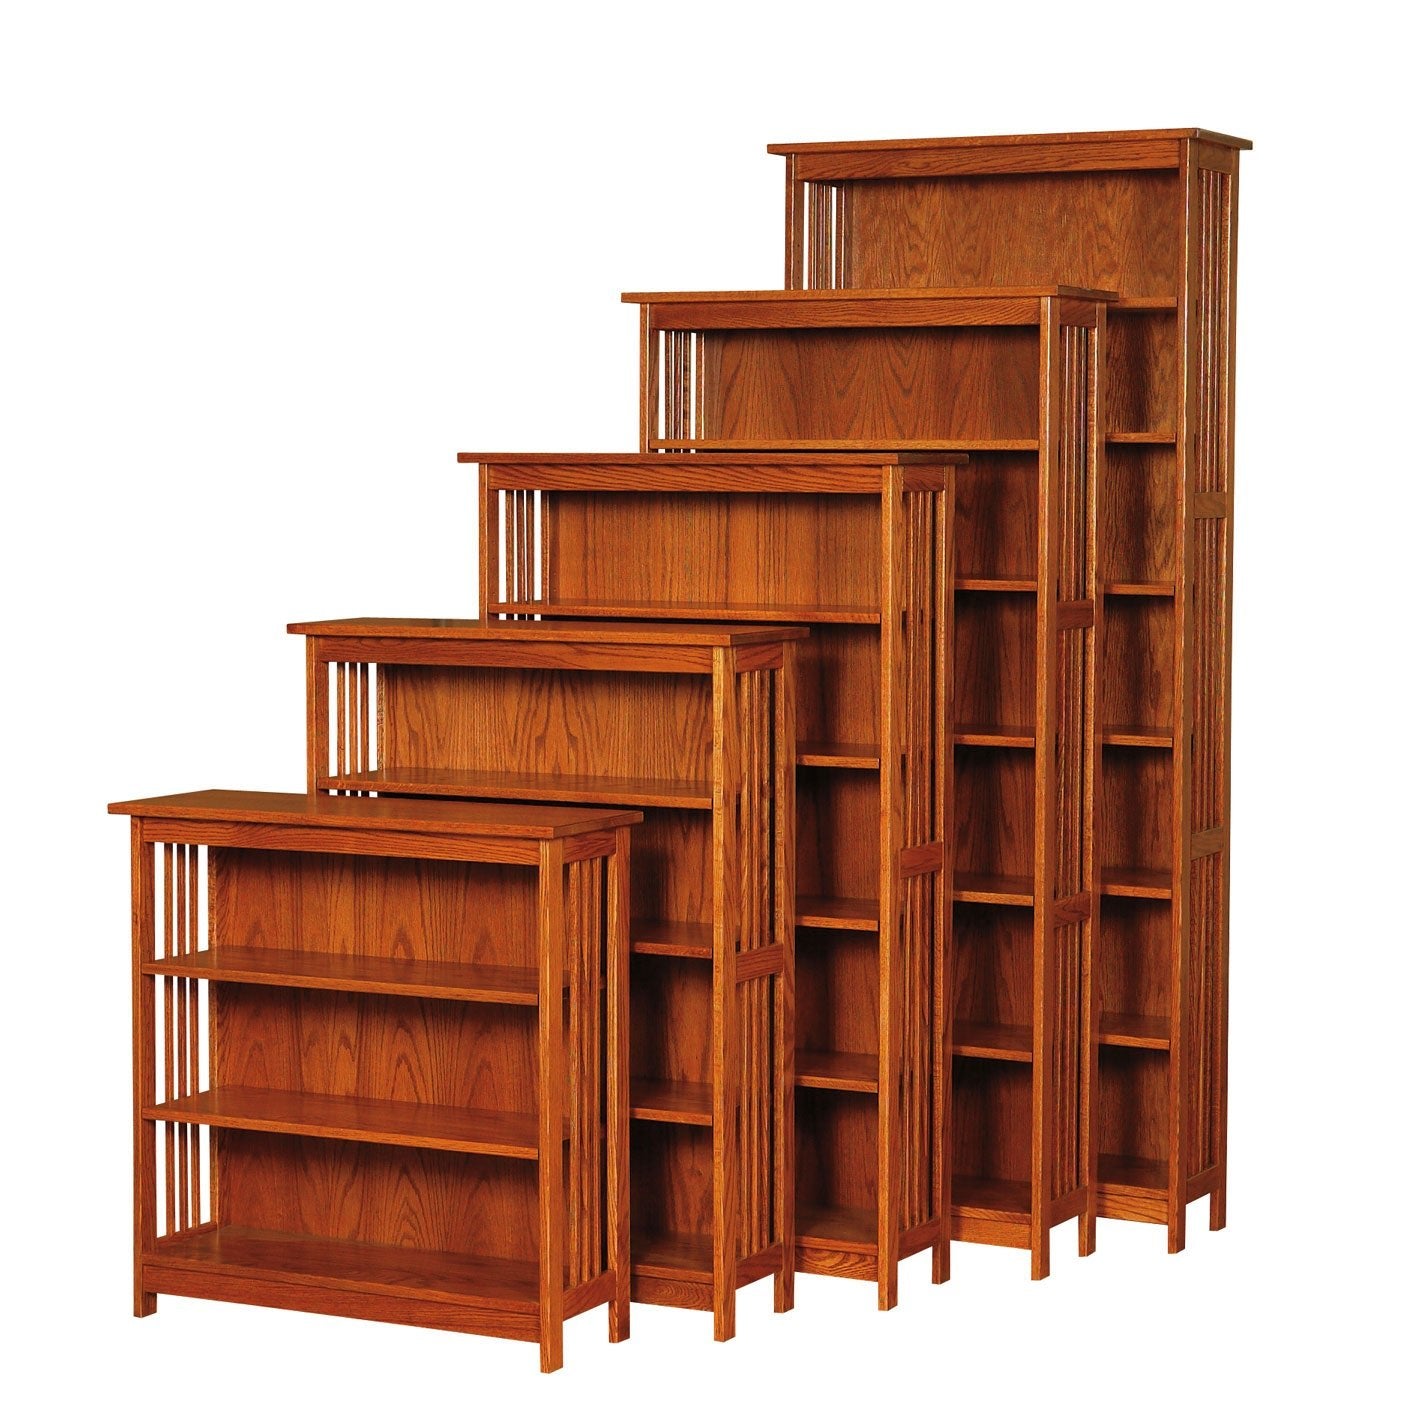 Country Mission Bookcase - snyders.furniture